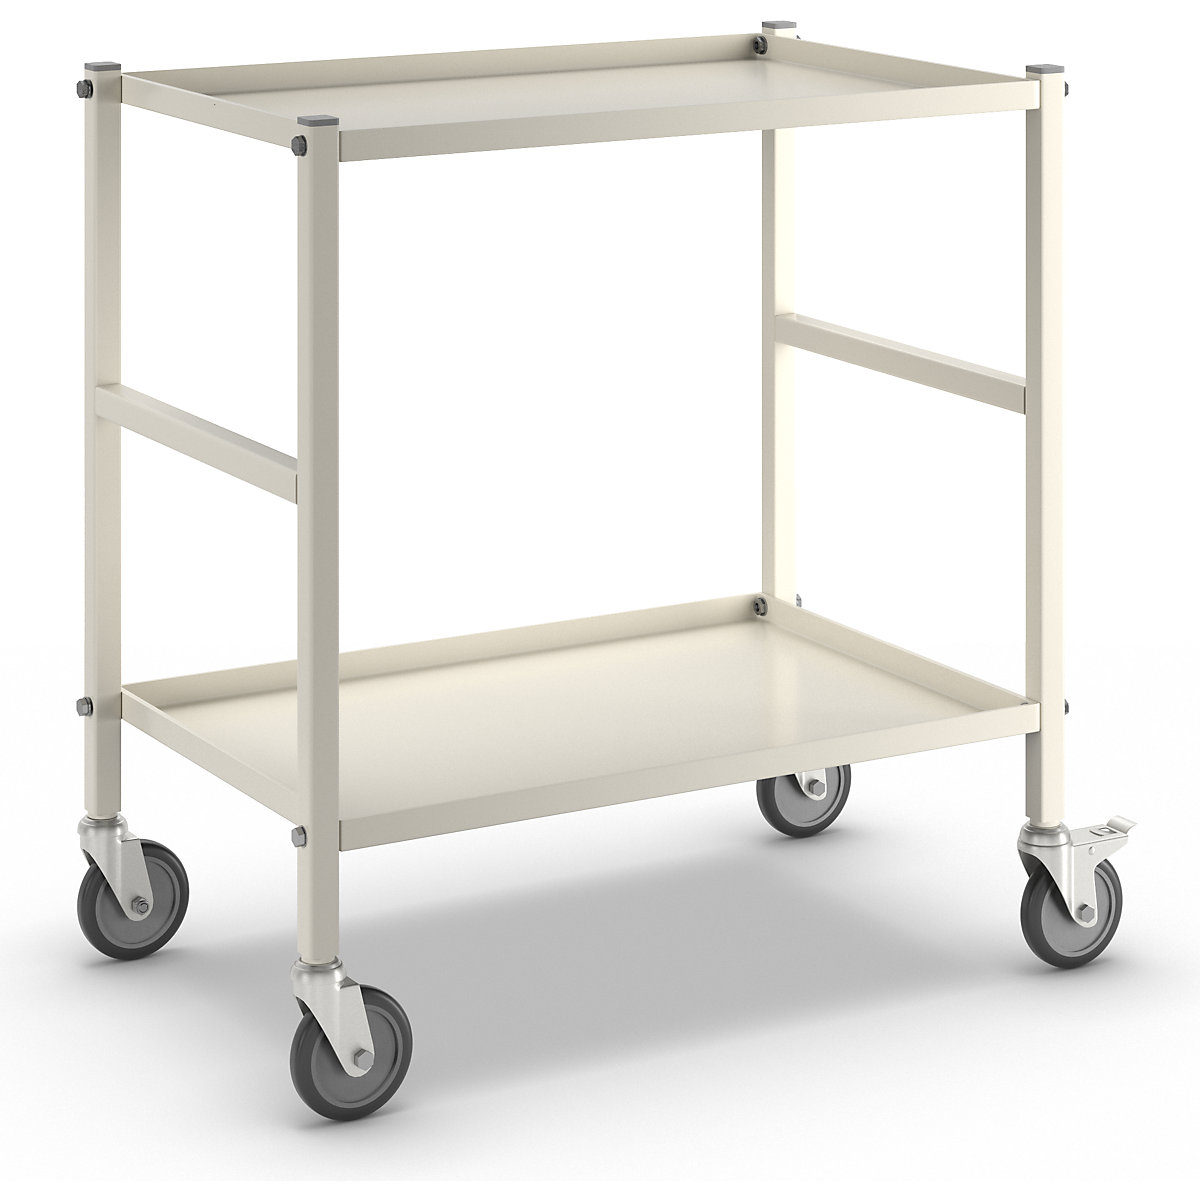 Table trolley with 2 shelves – Kongamek, 4 swivel castors, 2 with stops, white-12